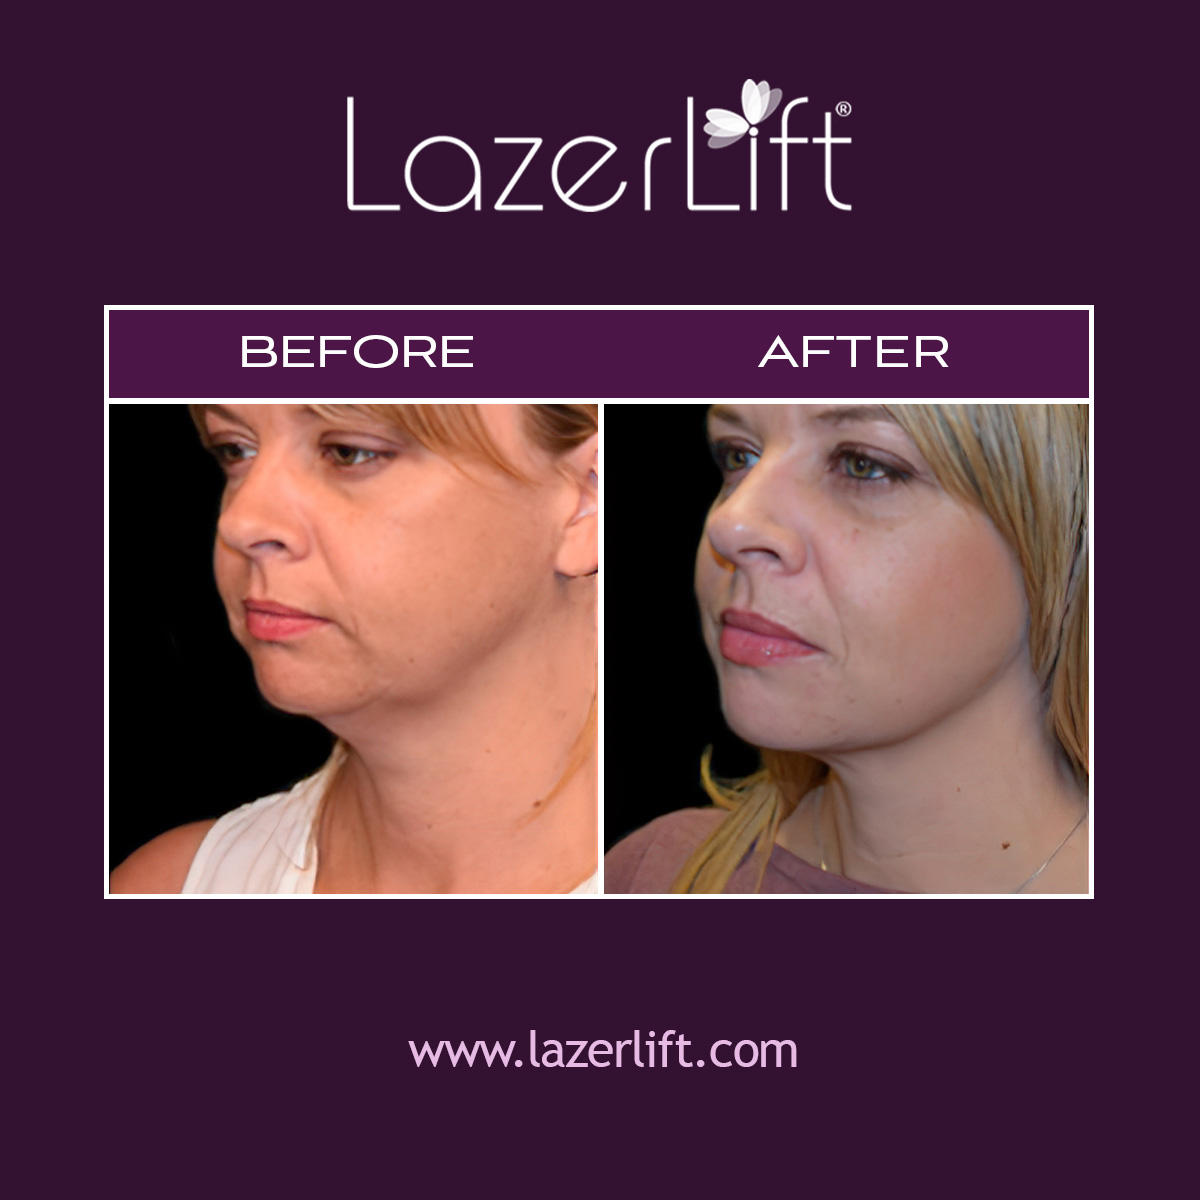 Our facial plastic surgeons in Tampa provide patients with transformative facelift results using LazerLift® technology. The LazerLift® facelift targets the mid-to-lower face to create a youthful look and reverse the signs of aging. LazaerLift® is the minimally-invasive solution to reduce wrinkles, eliminate turkey neck, sculpt the jawline, and more.